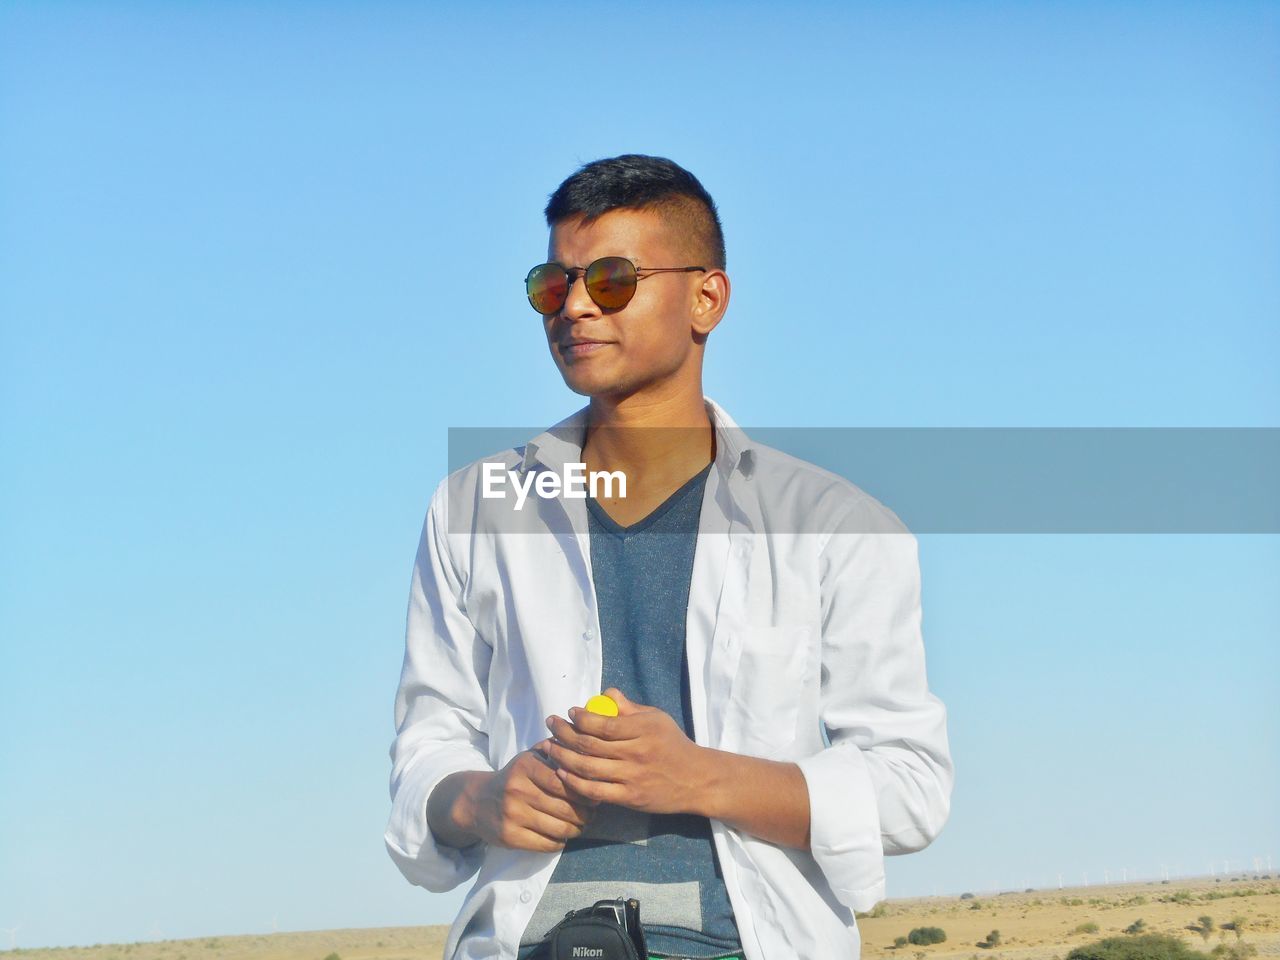 Young man wearing sunglasses standing against clear blue sky